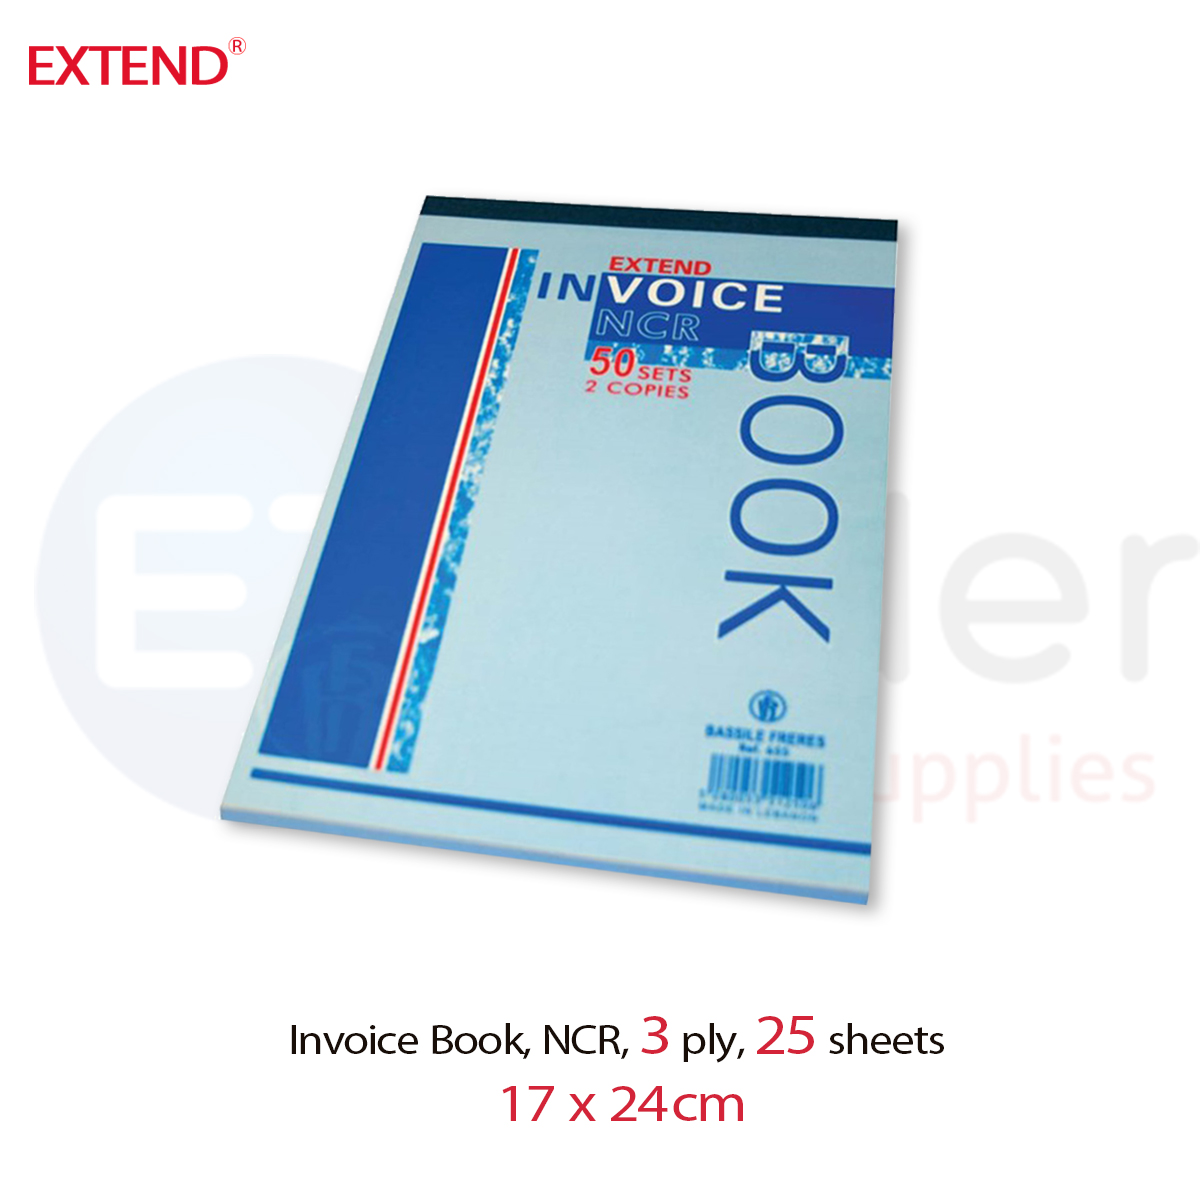 Invoice book, NCR, 2 ply, 12*17, 50 SHEETS